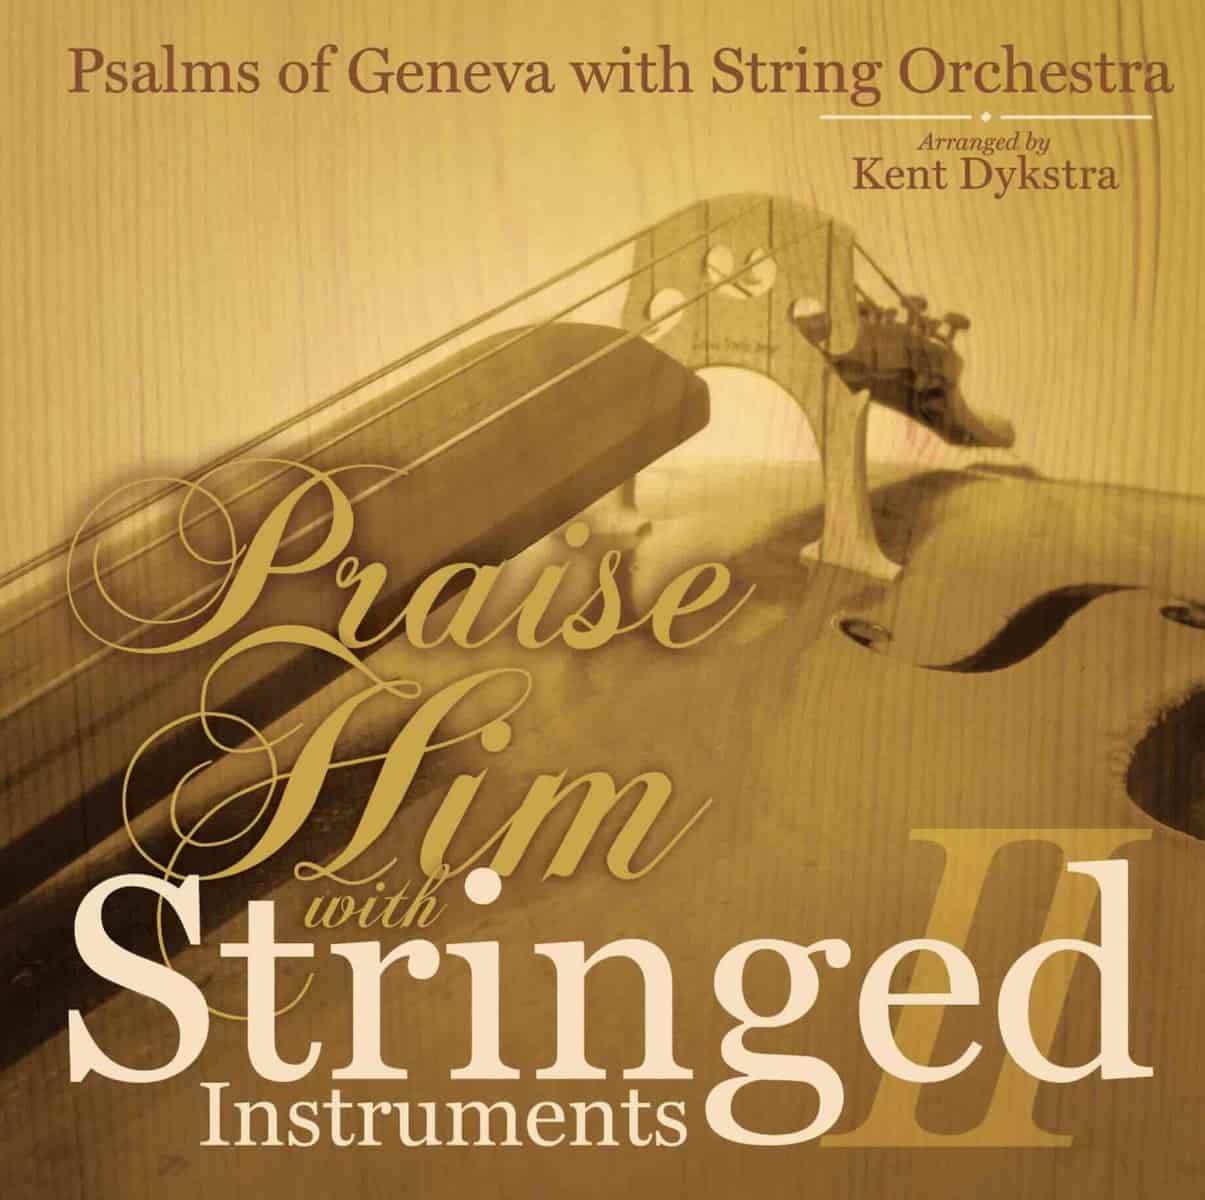 Cover image "Praise Him with Stringed Instruments: Volume 2" by Kent Dykstra